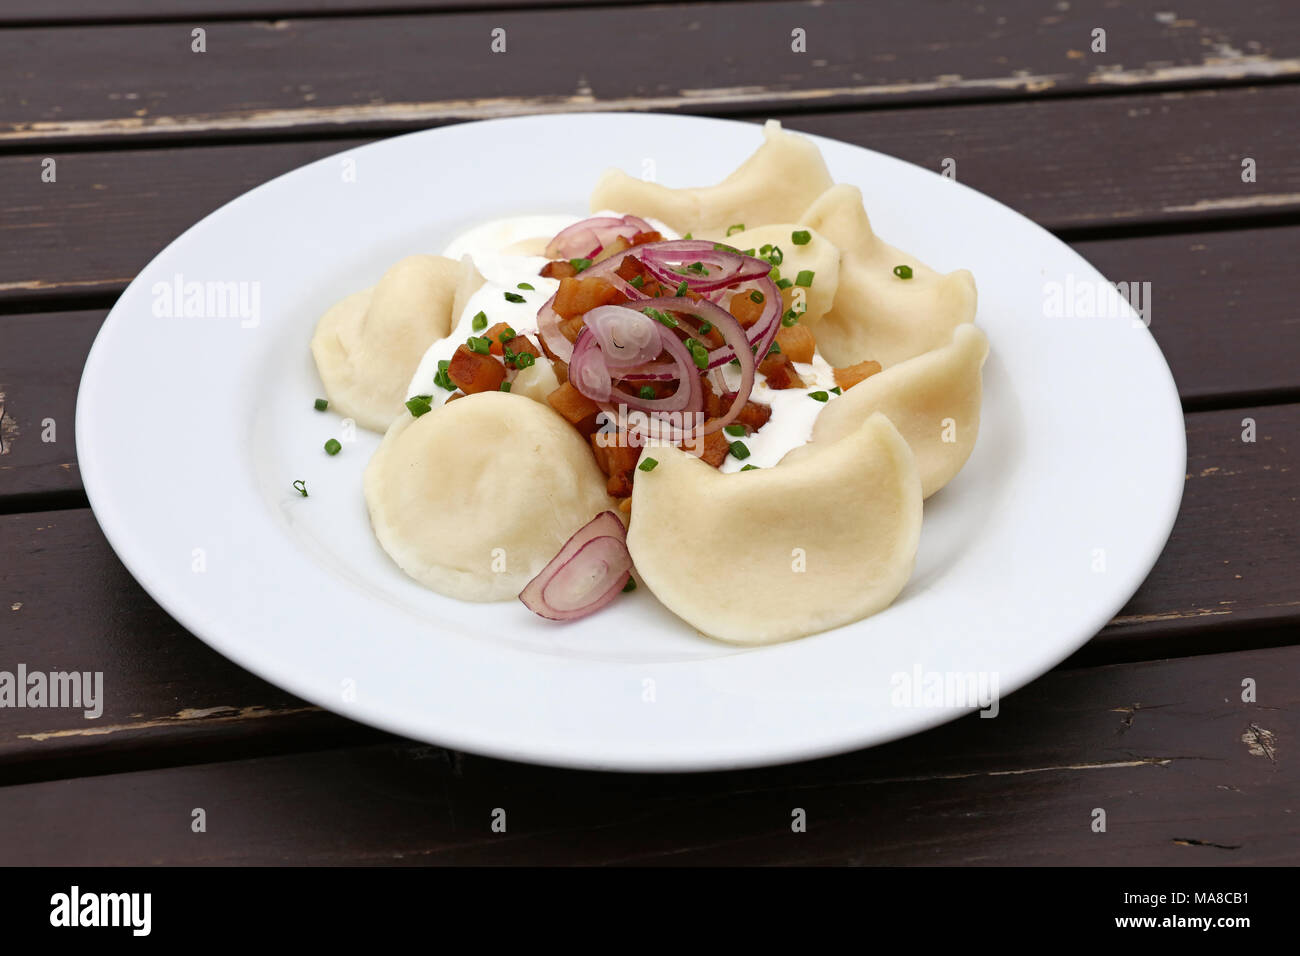 Plate of pierogi or varenyky stuffed filled dumplings with sour cream, bacon and onion, traditional East Europe cuisine meal popular in Poland, Ukrain Stock Photo